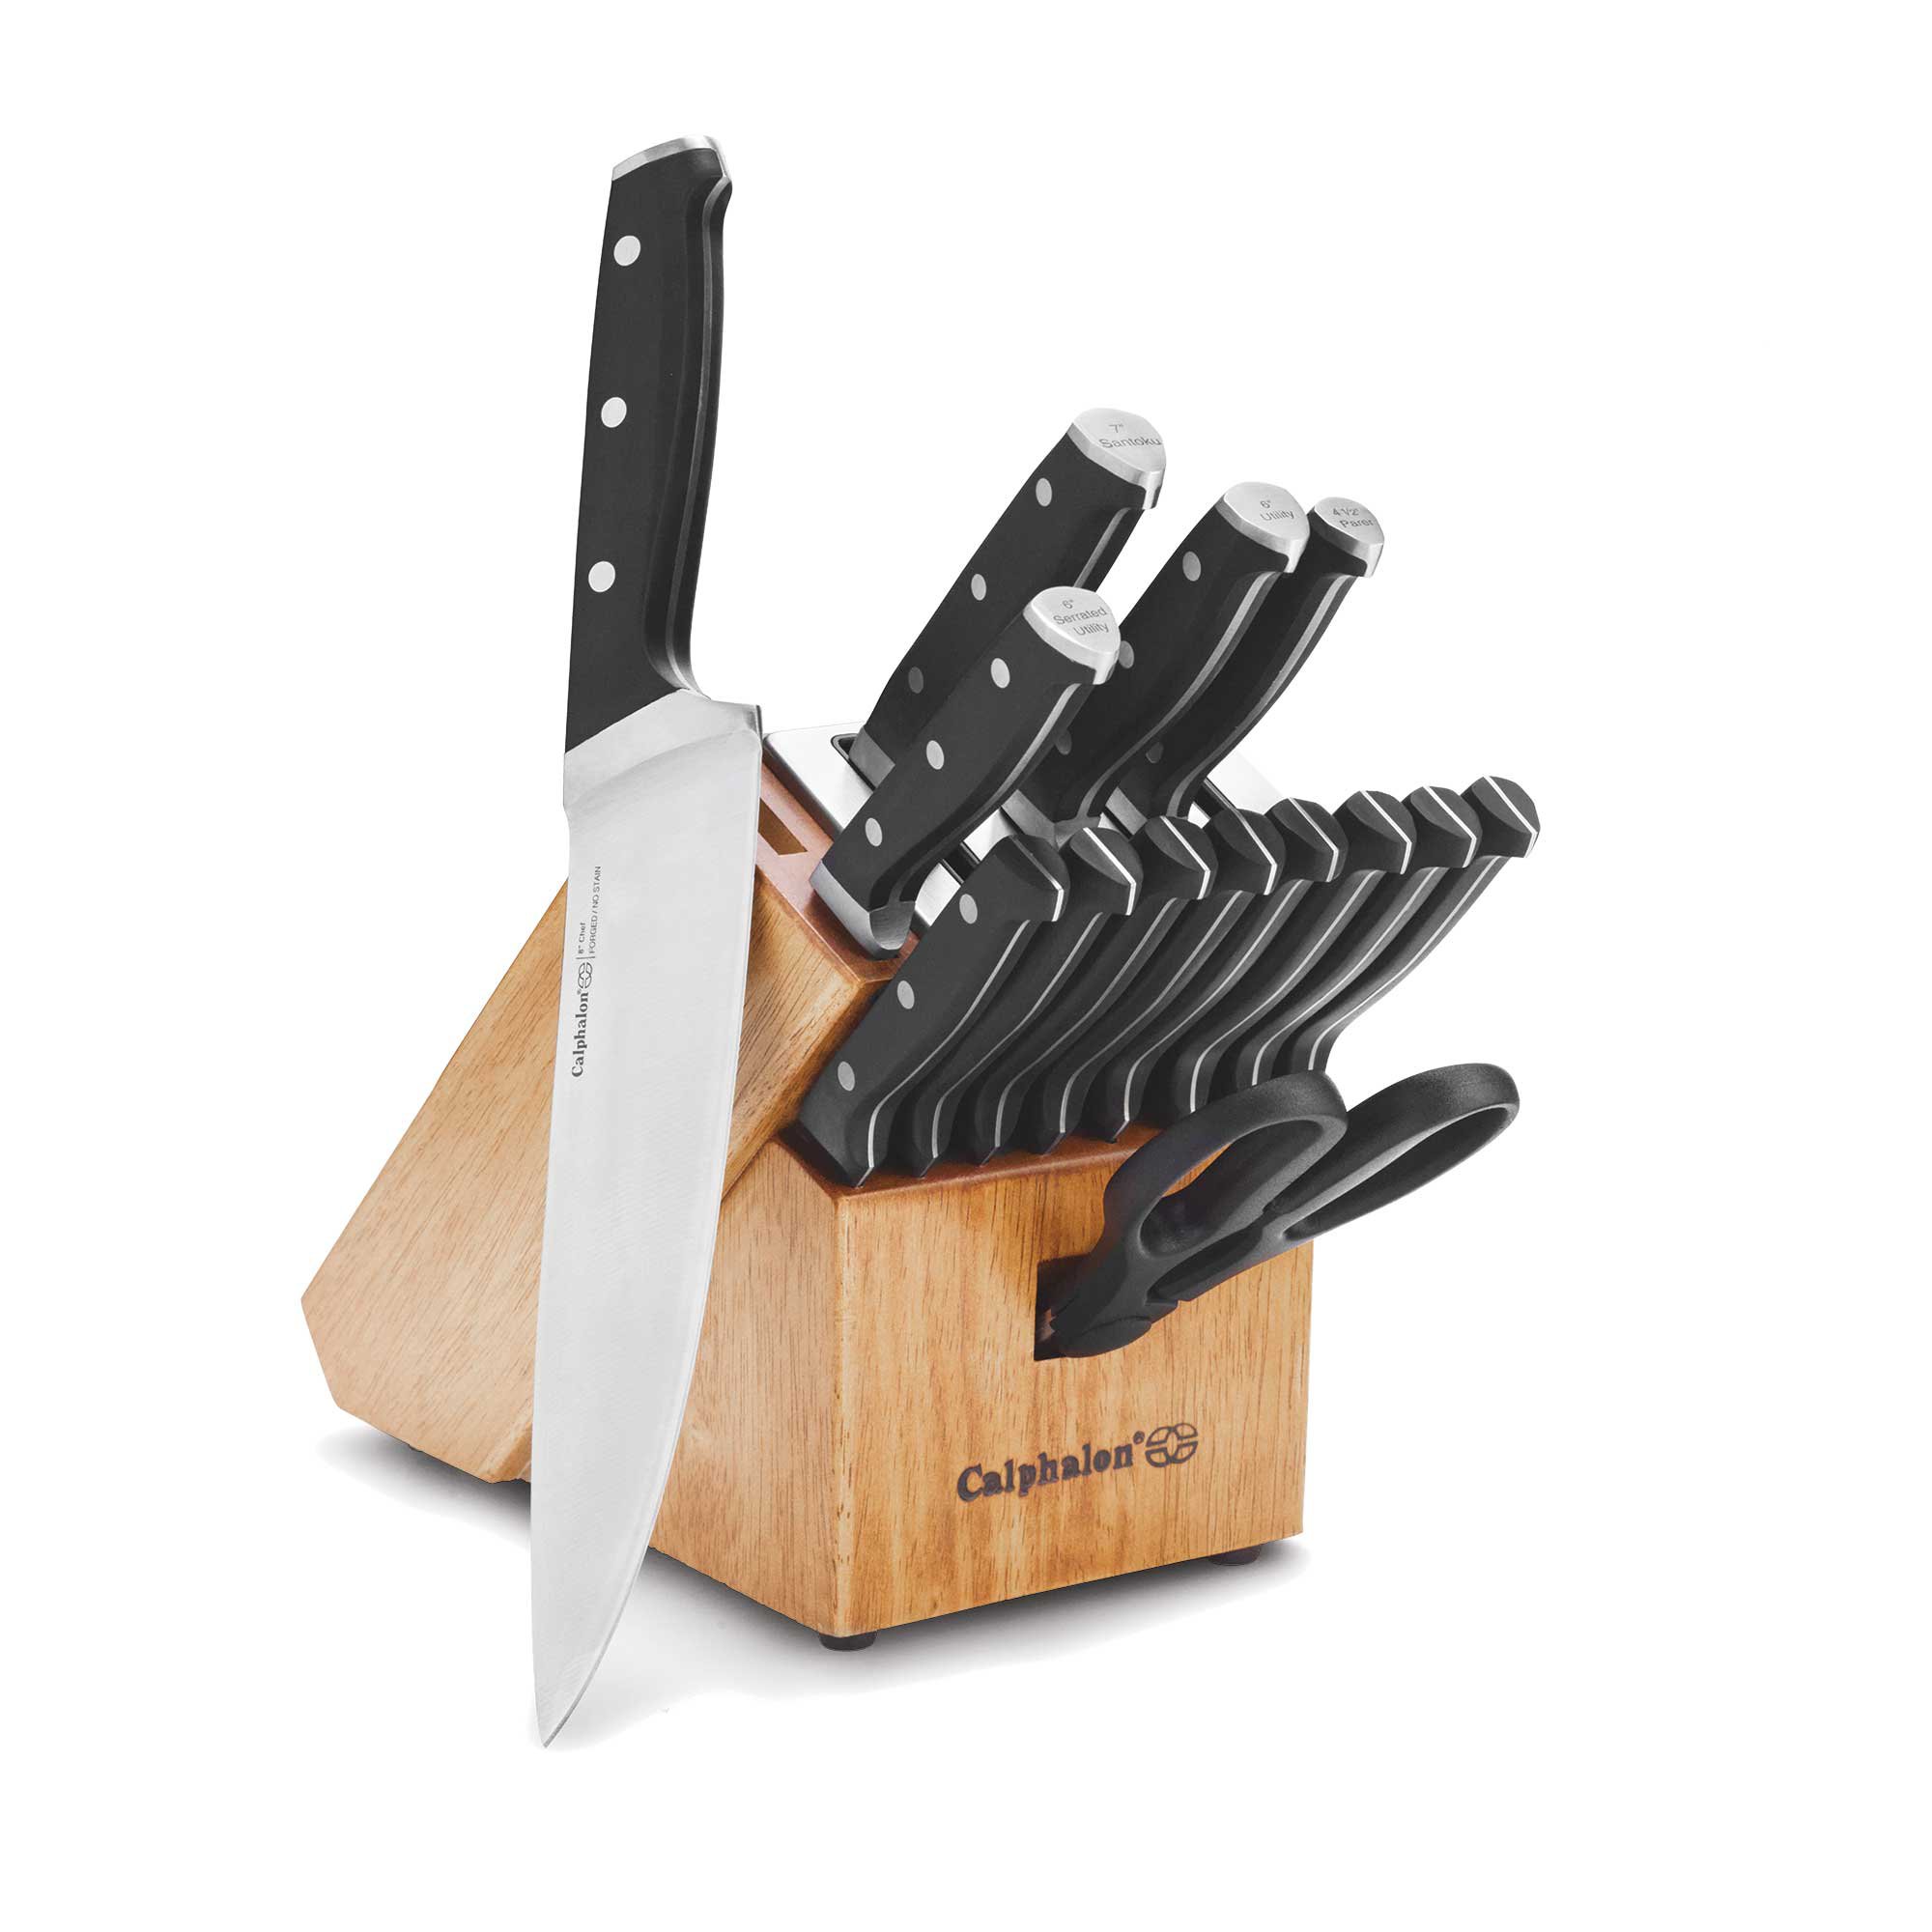 Calphalon Classic Self Sharpening Stainless Steel Cutlery Knife Block Set  with SharpIN Technology, 15 Piece